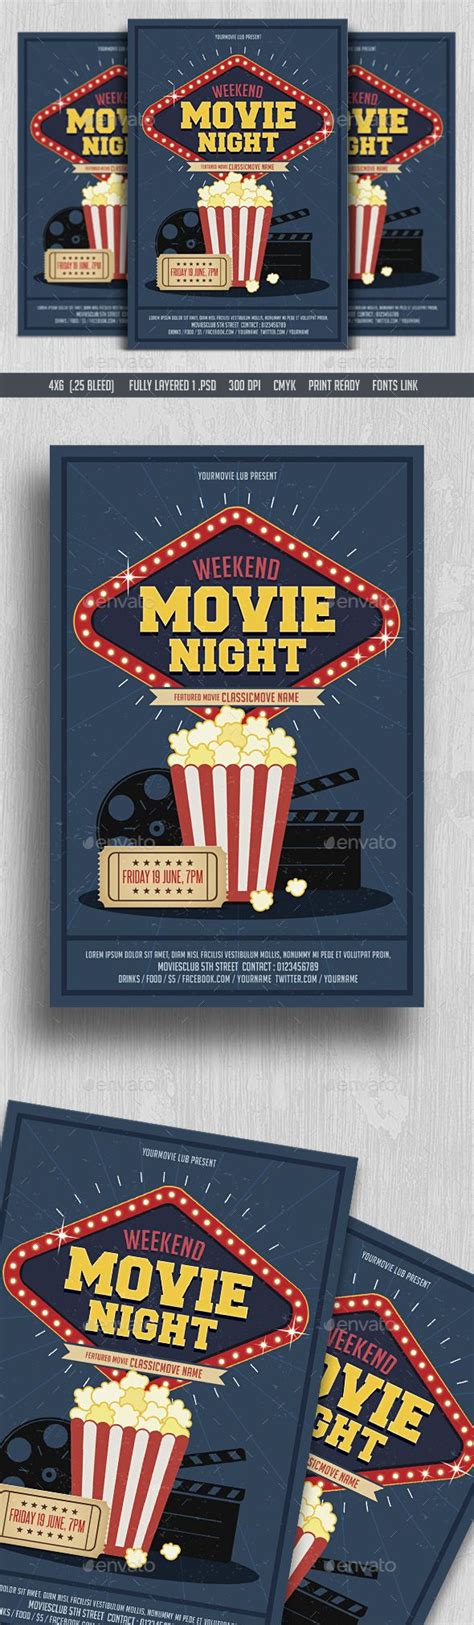 Download over 7 free premiere pro templates! Movie Night Flyer Template PSD. Download here: https ...